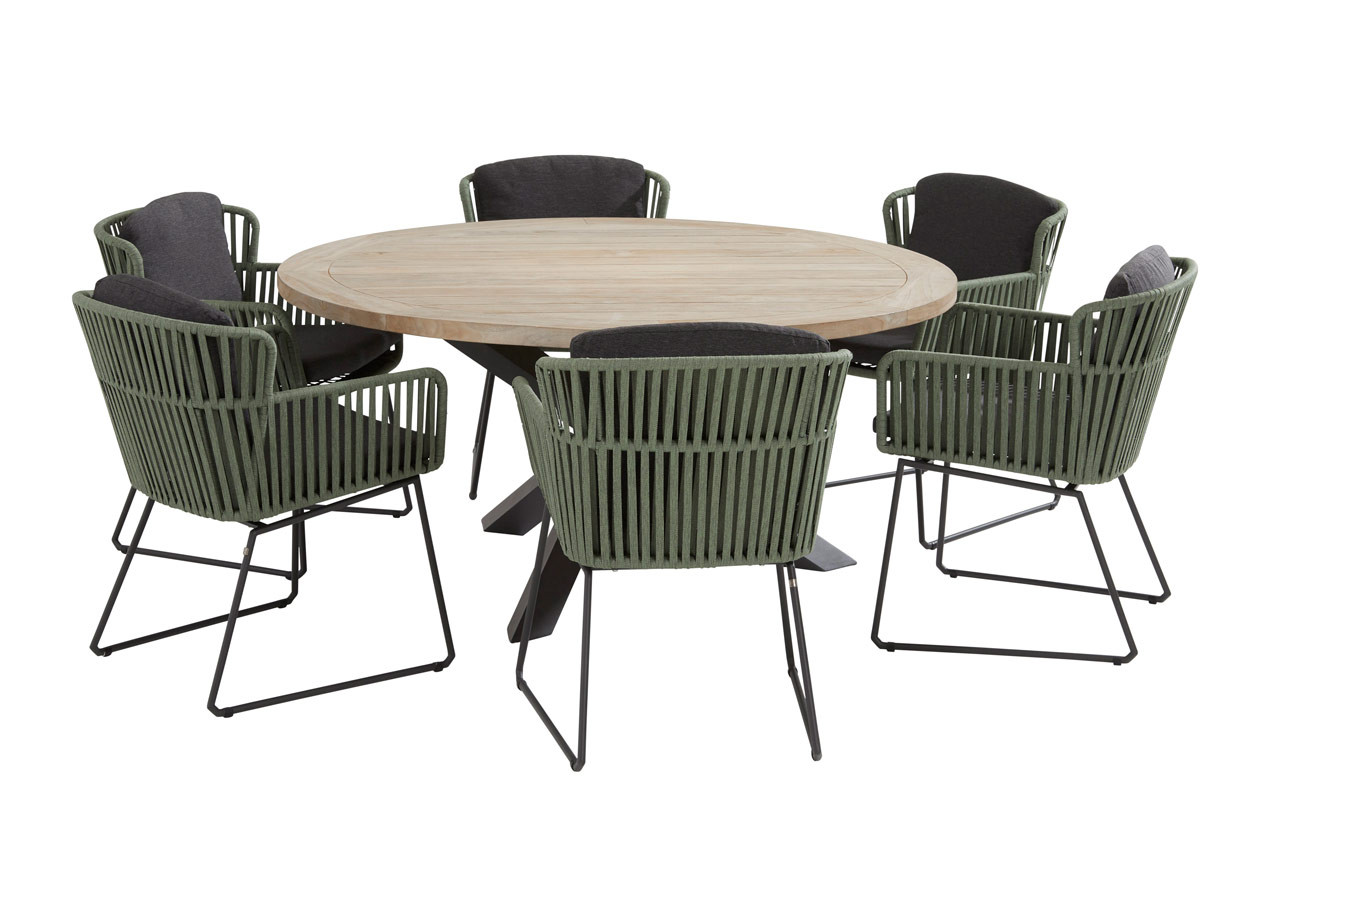 Vitali green dining set with round Louvre table 160 cm